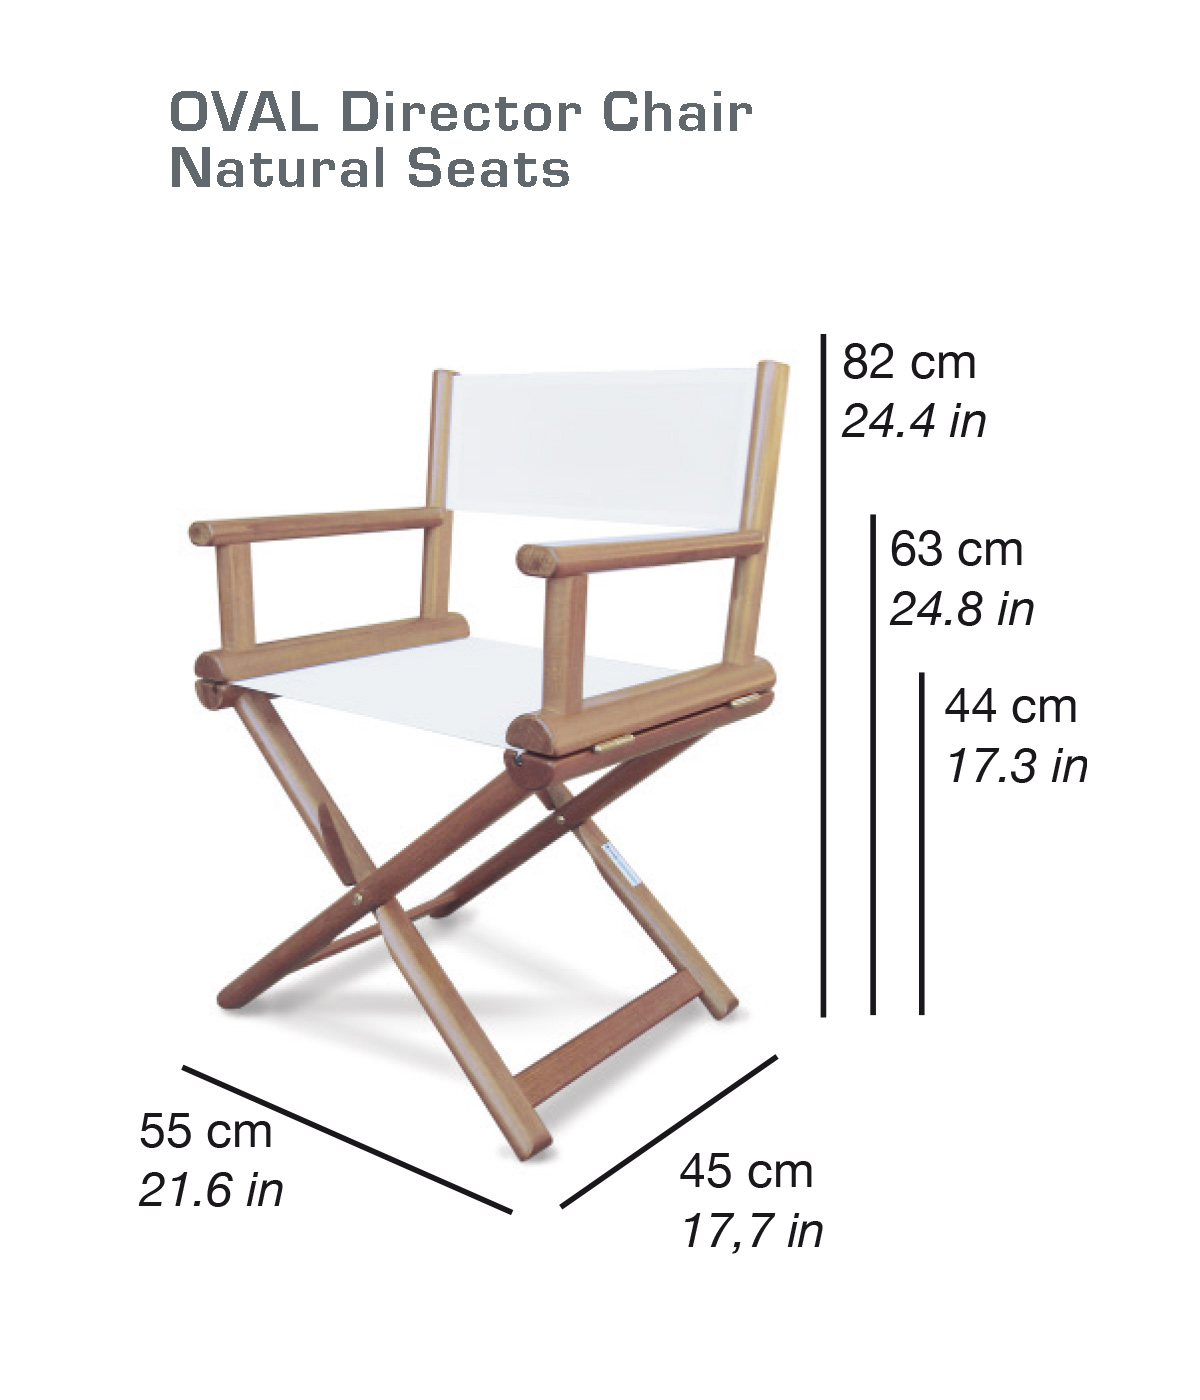 OVAL Director Chair | Natural